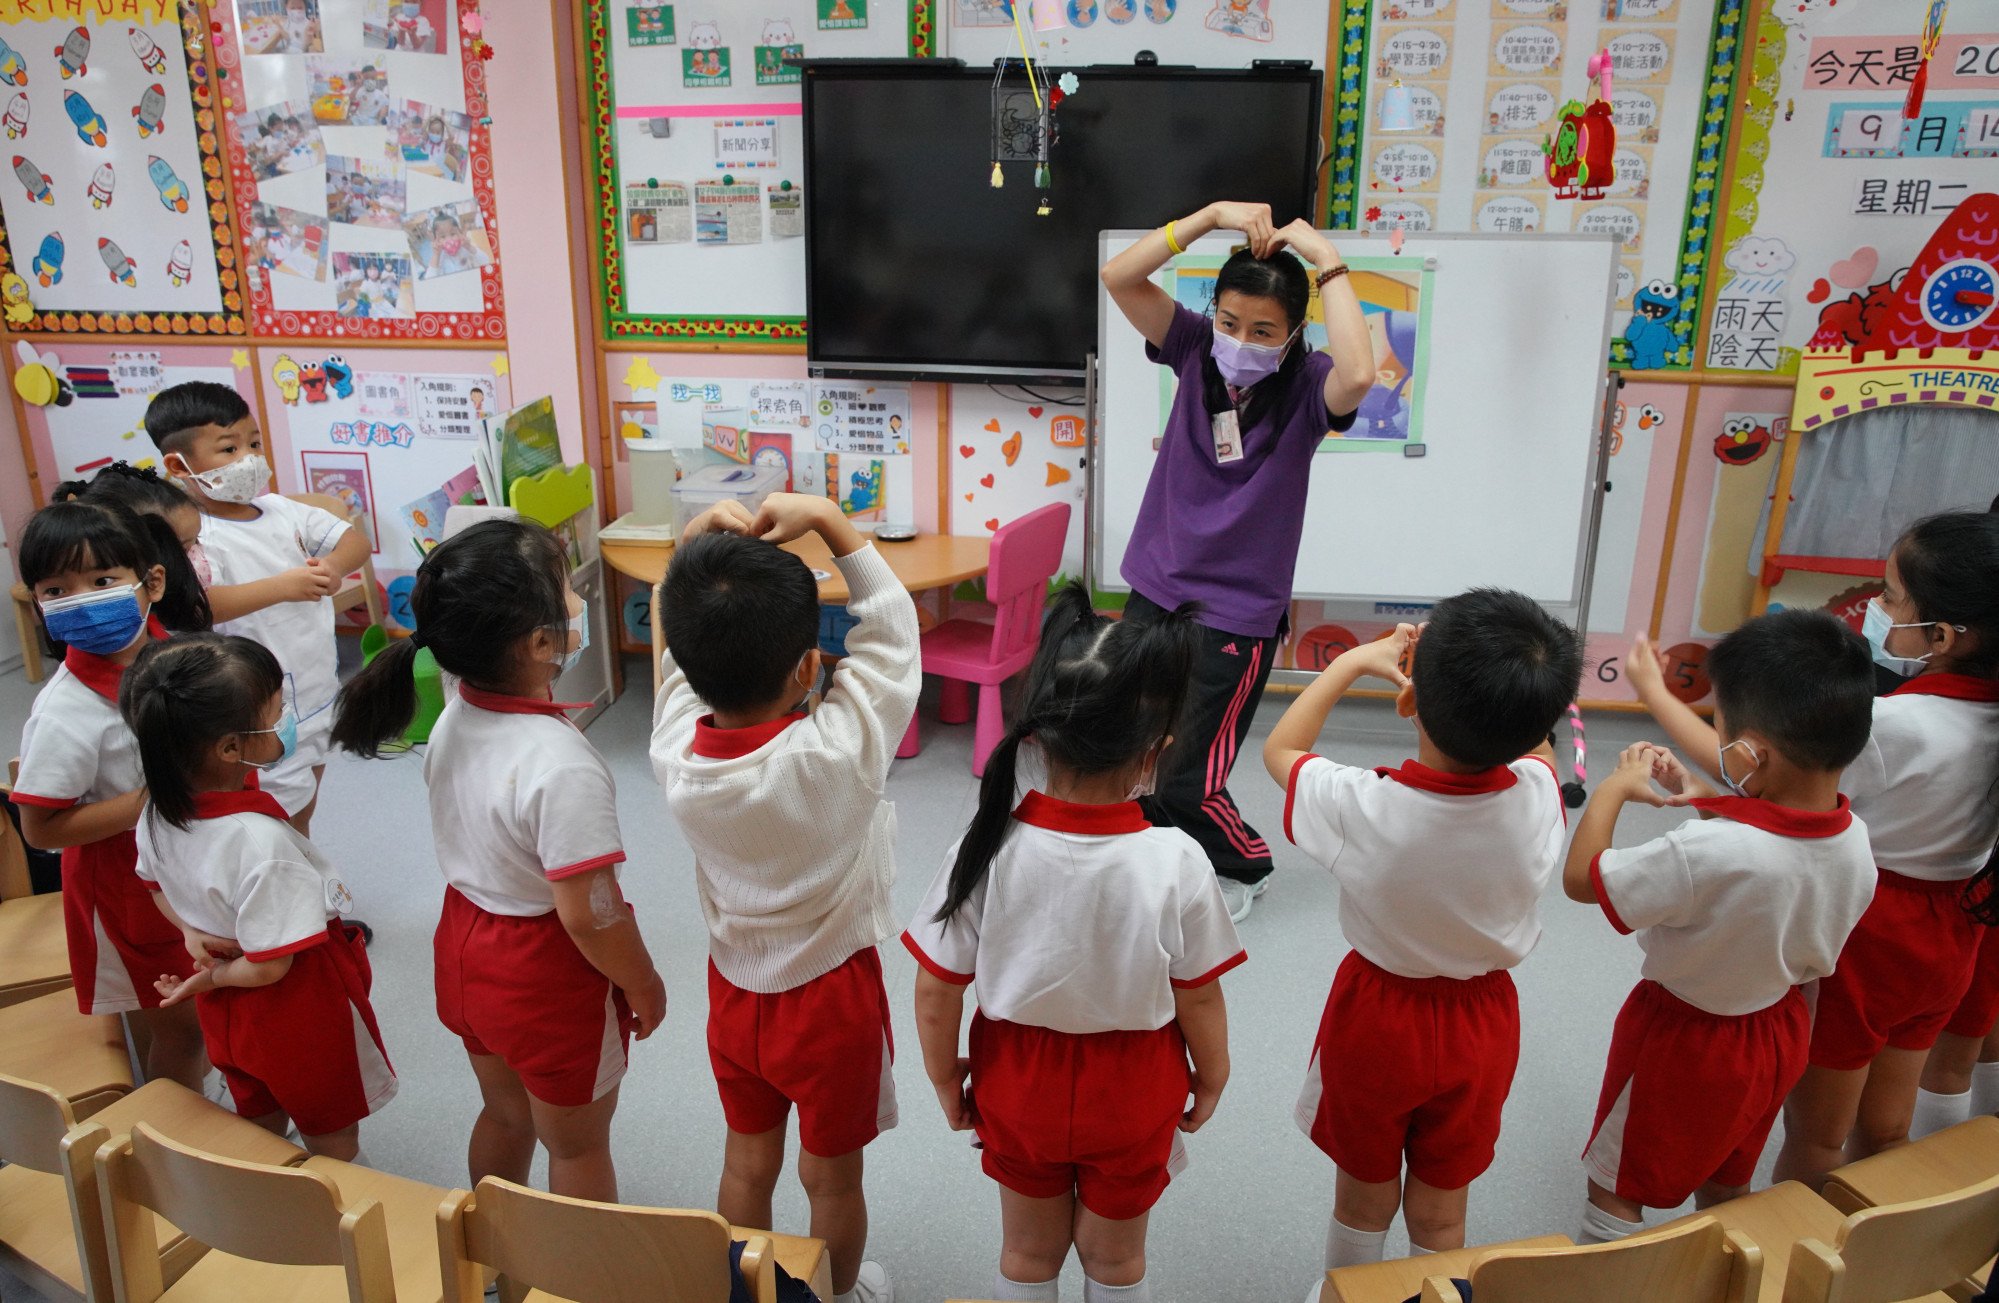 Schools are rushing to recruit fresh teachers to make up for departing educators. Photo: Winson Wong